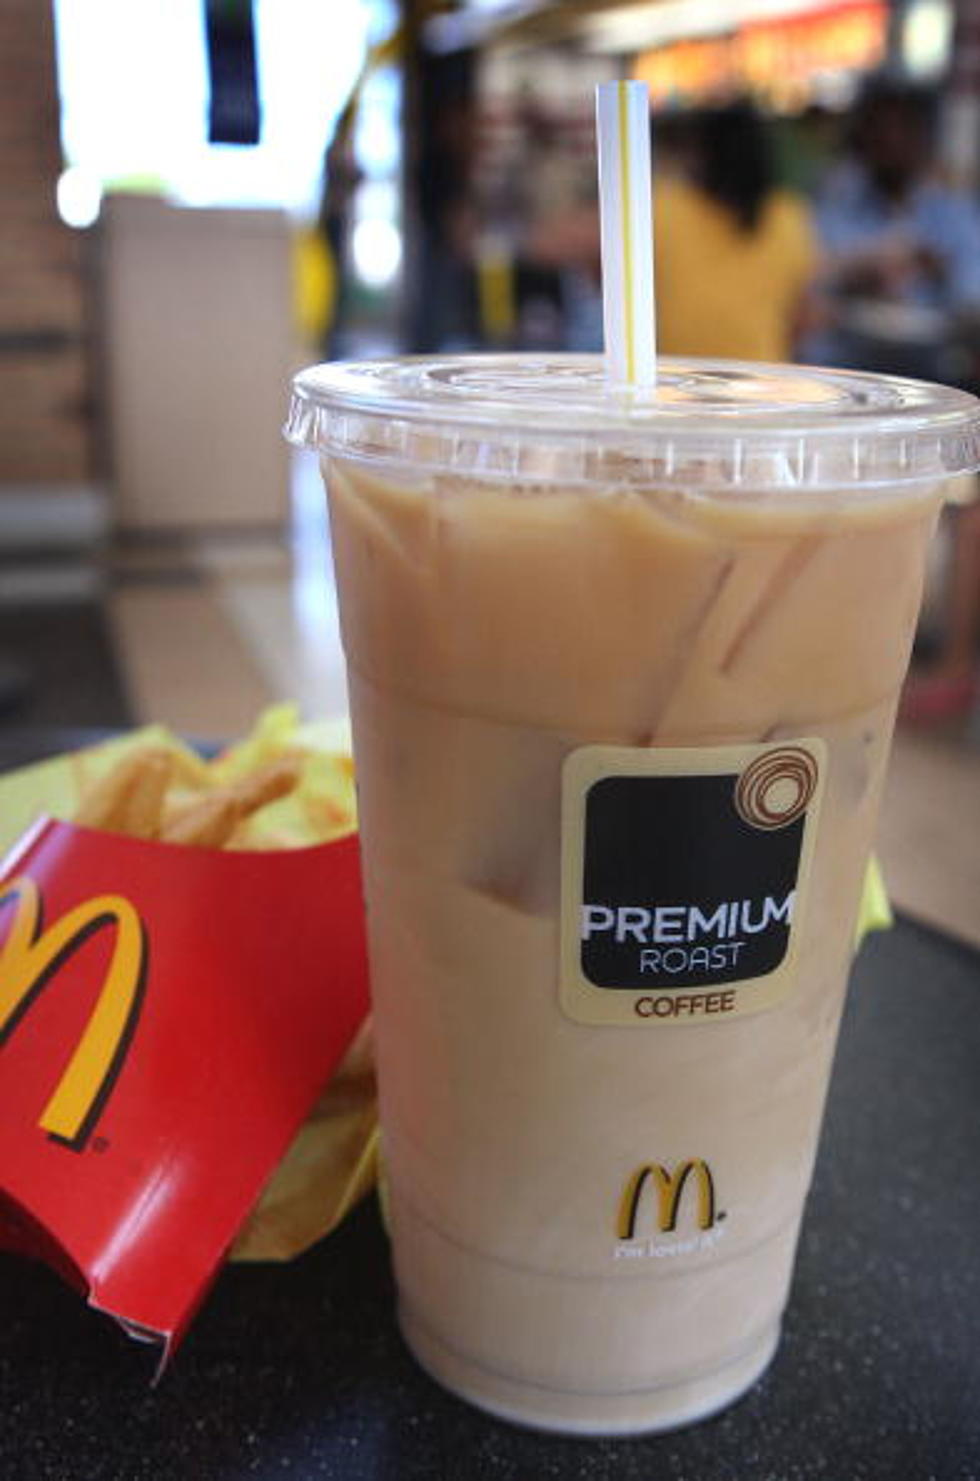 A Big Change Is Coming To McDonald’s This Fall